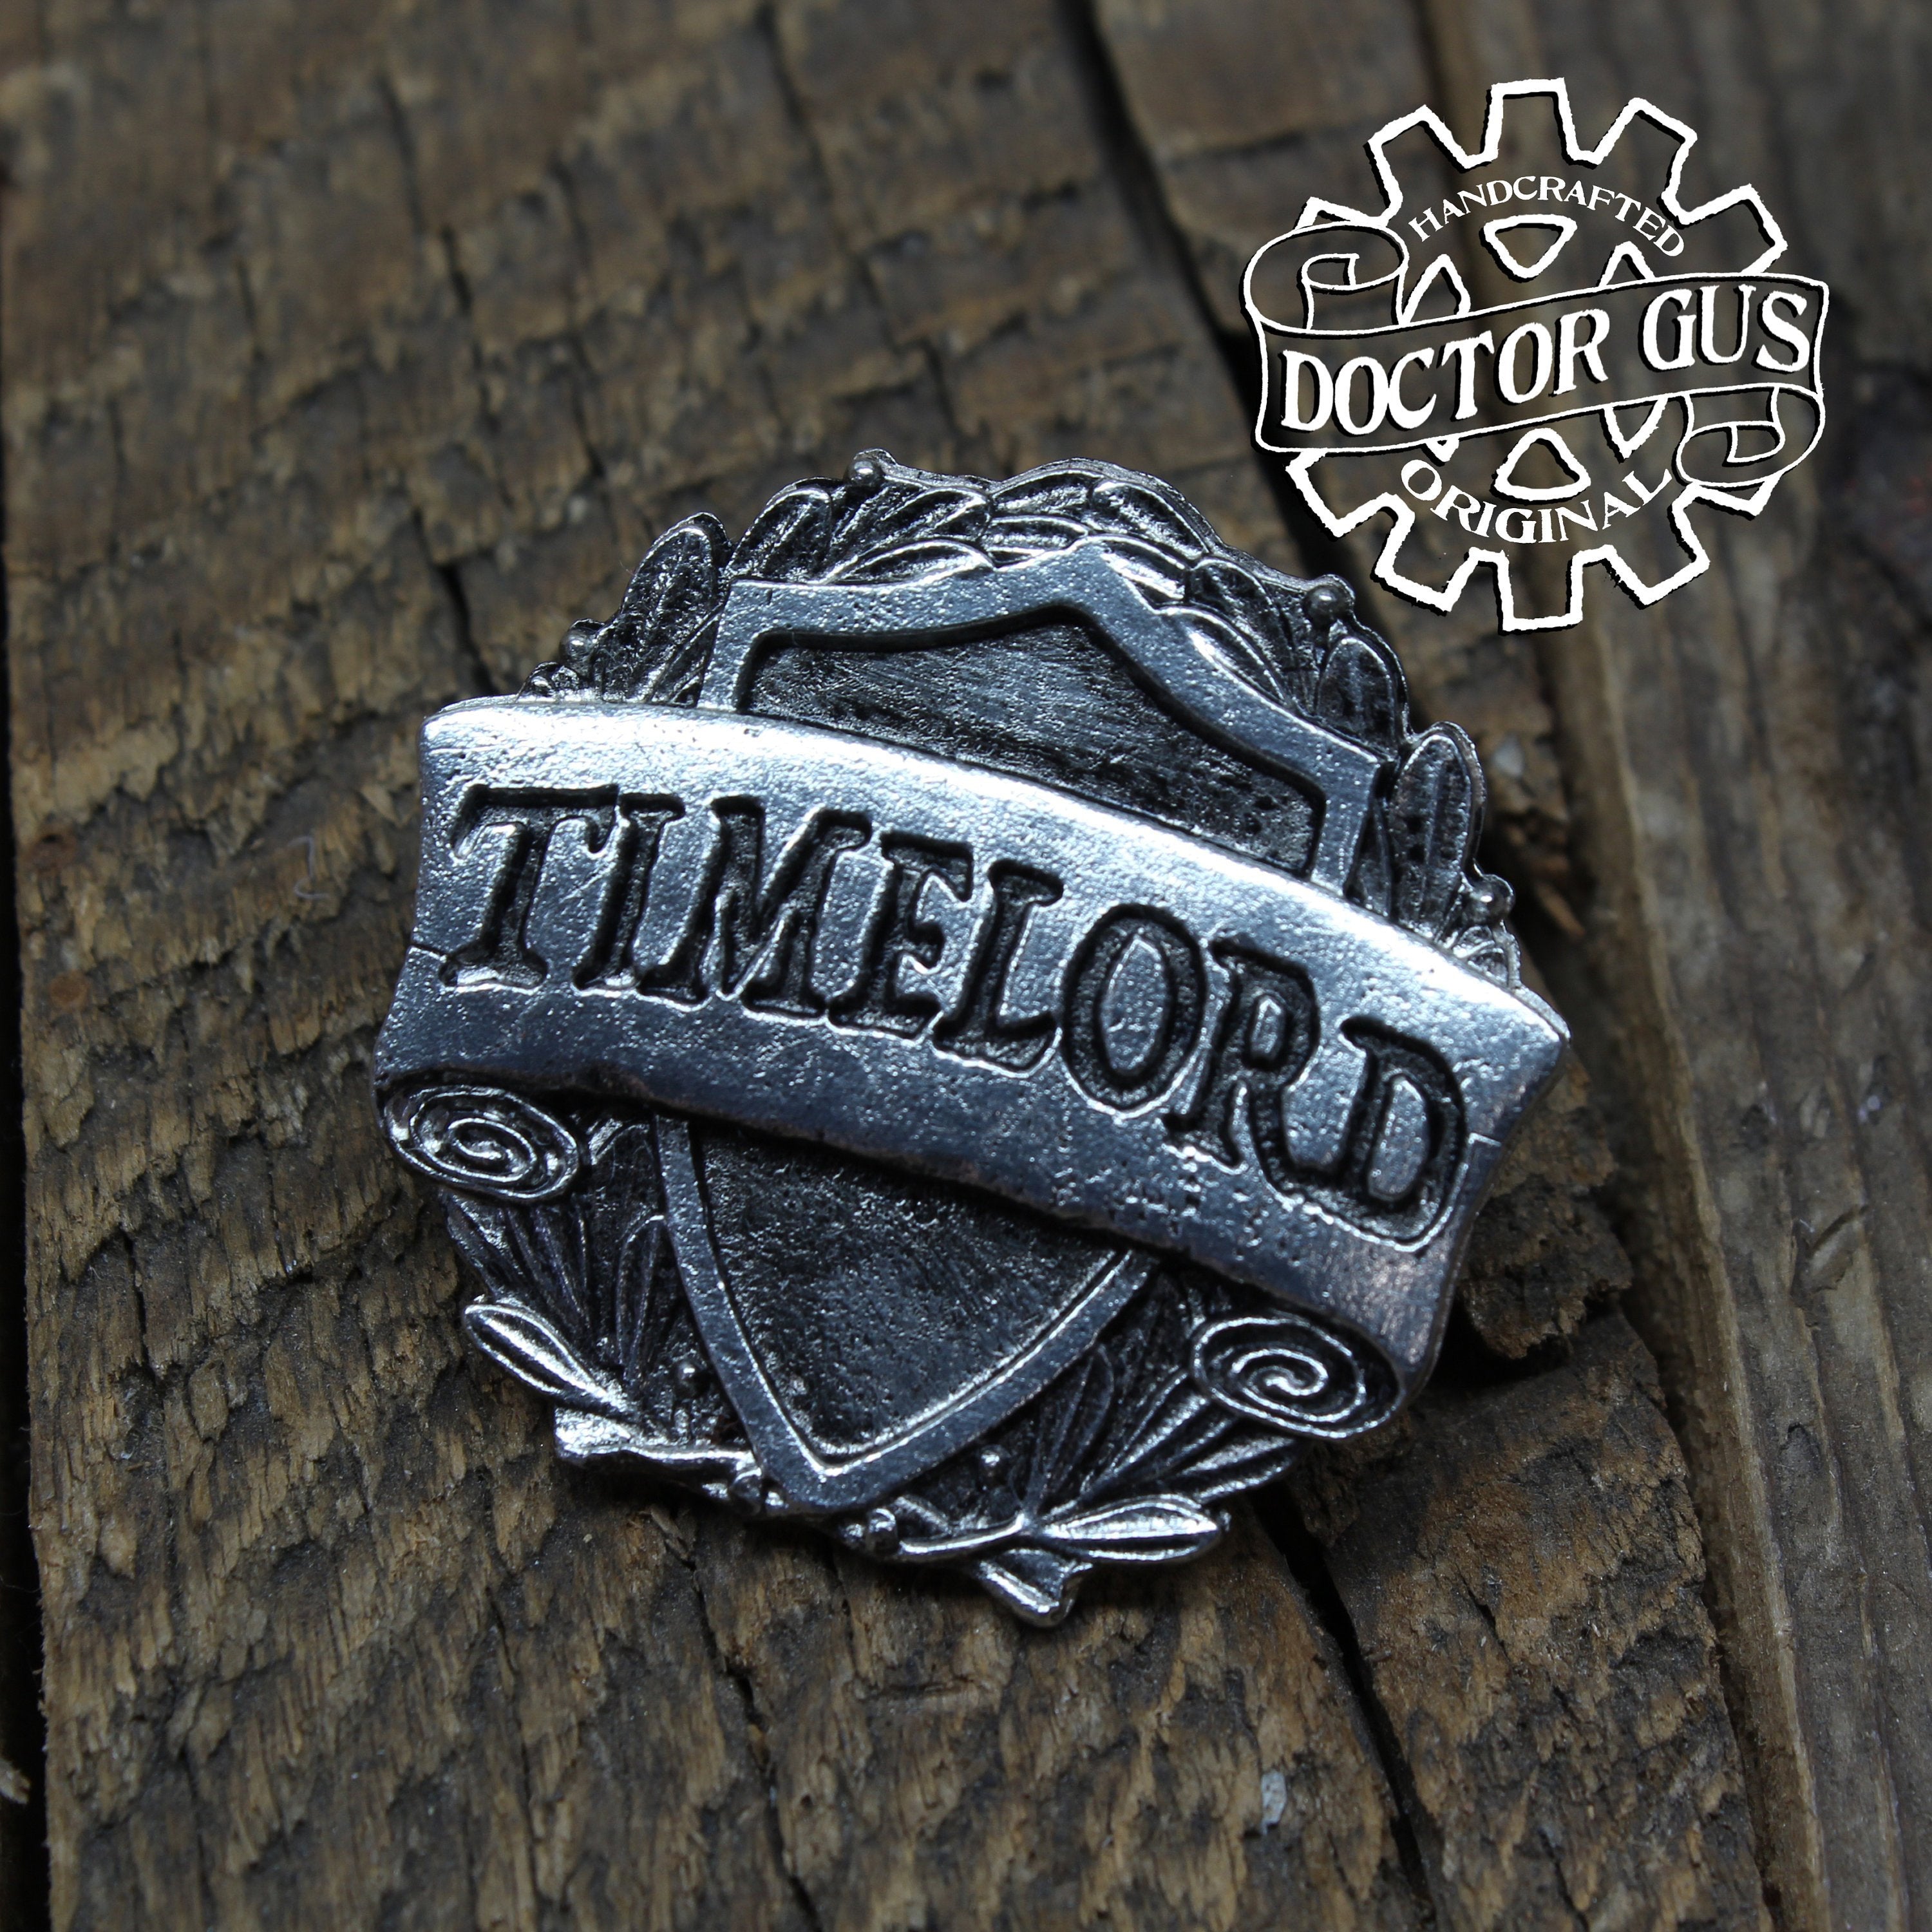 Timelord Badge